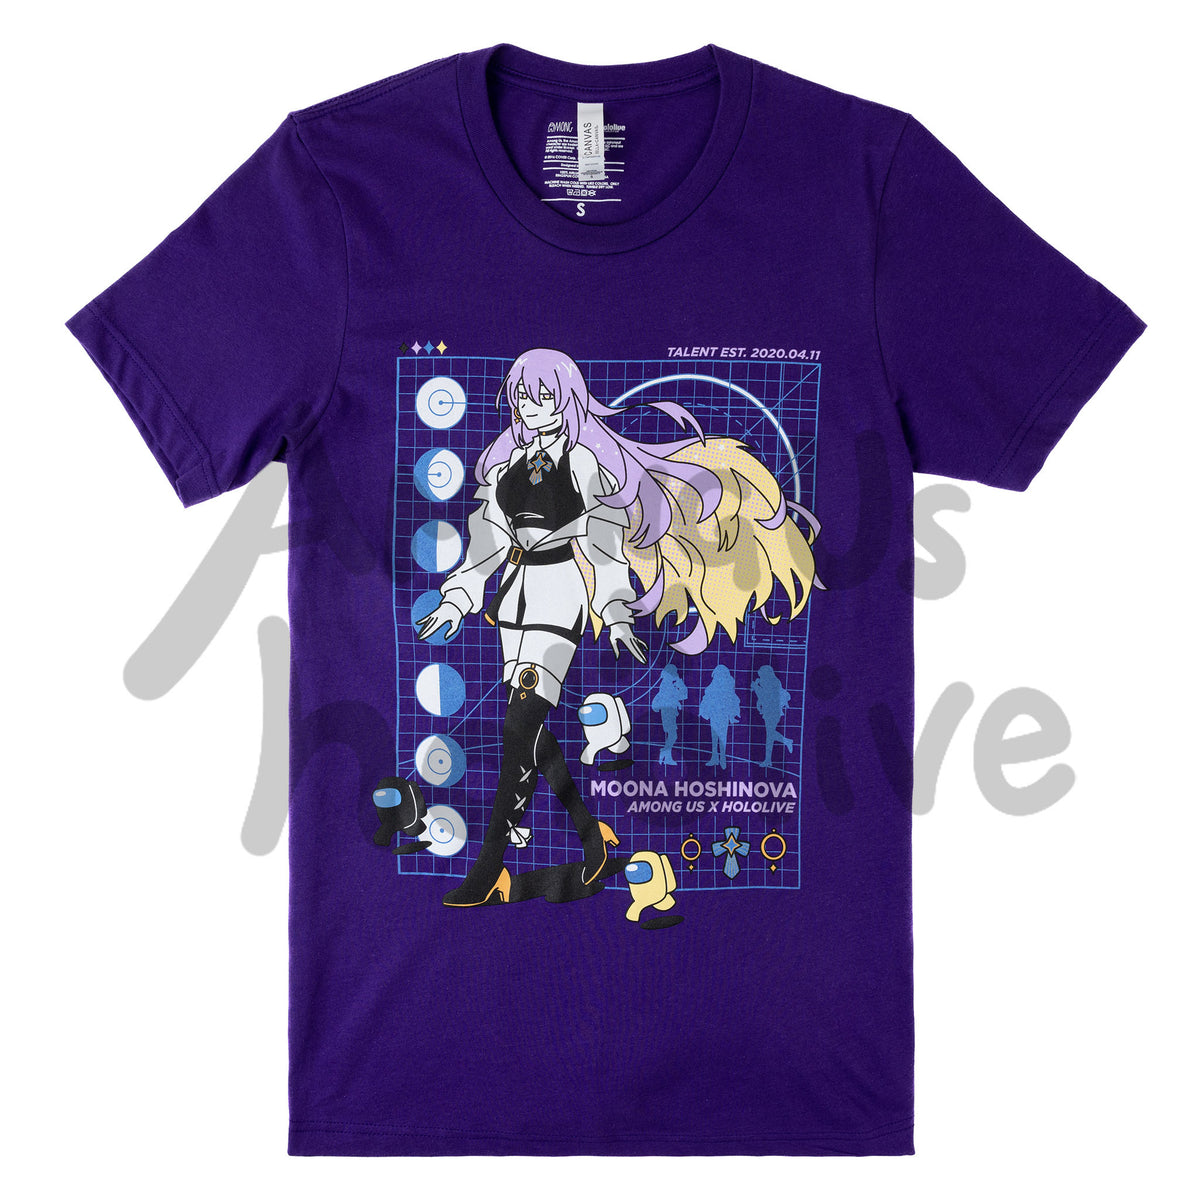 A flat lay photograph of a purple t-shirt. The printed art on the front of the shirt shows a full body illustration of Moona Hoshinova walking in front of a light blue spec grid. Her pink and yellow hair billows behind her. Small black, white, and yellow crewmates stroll beside the figure. 